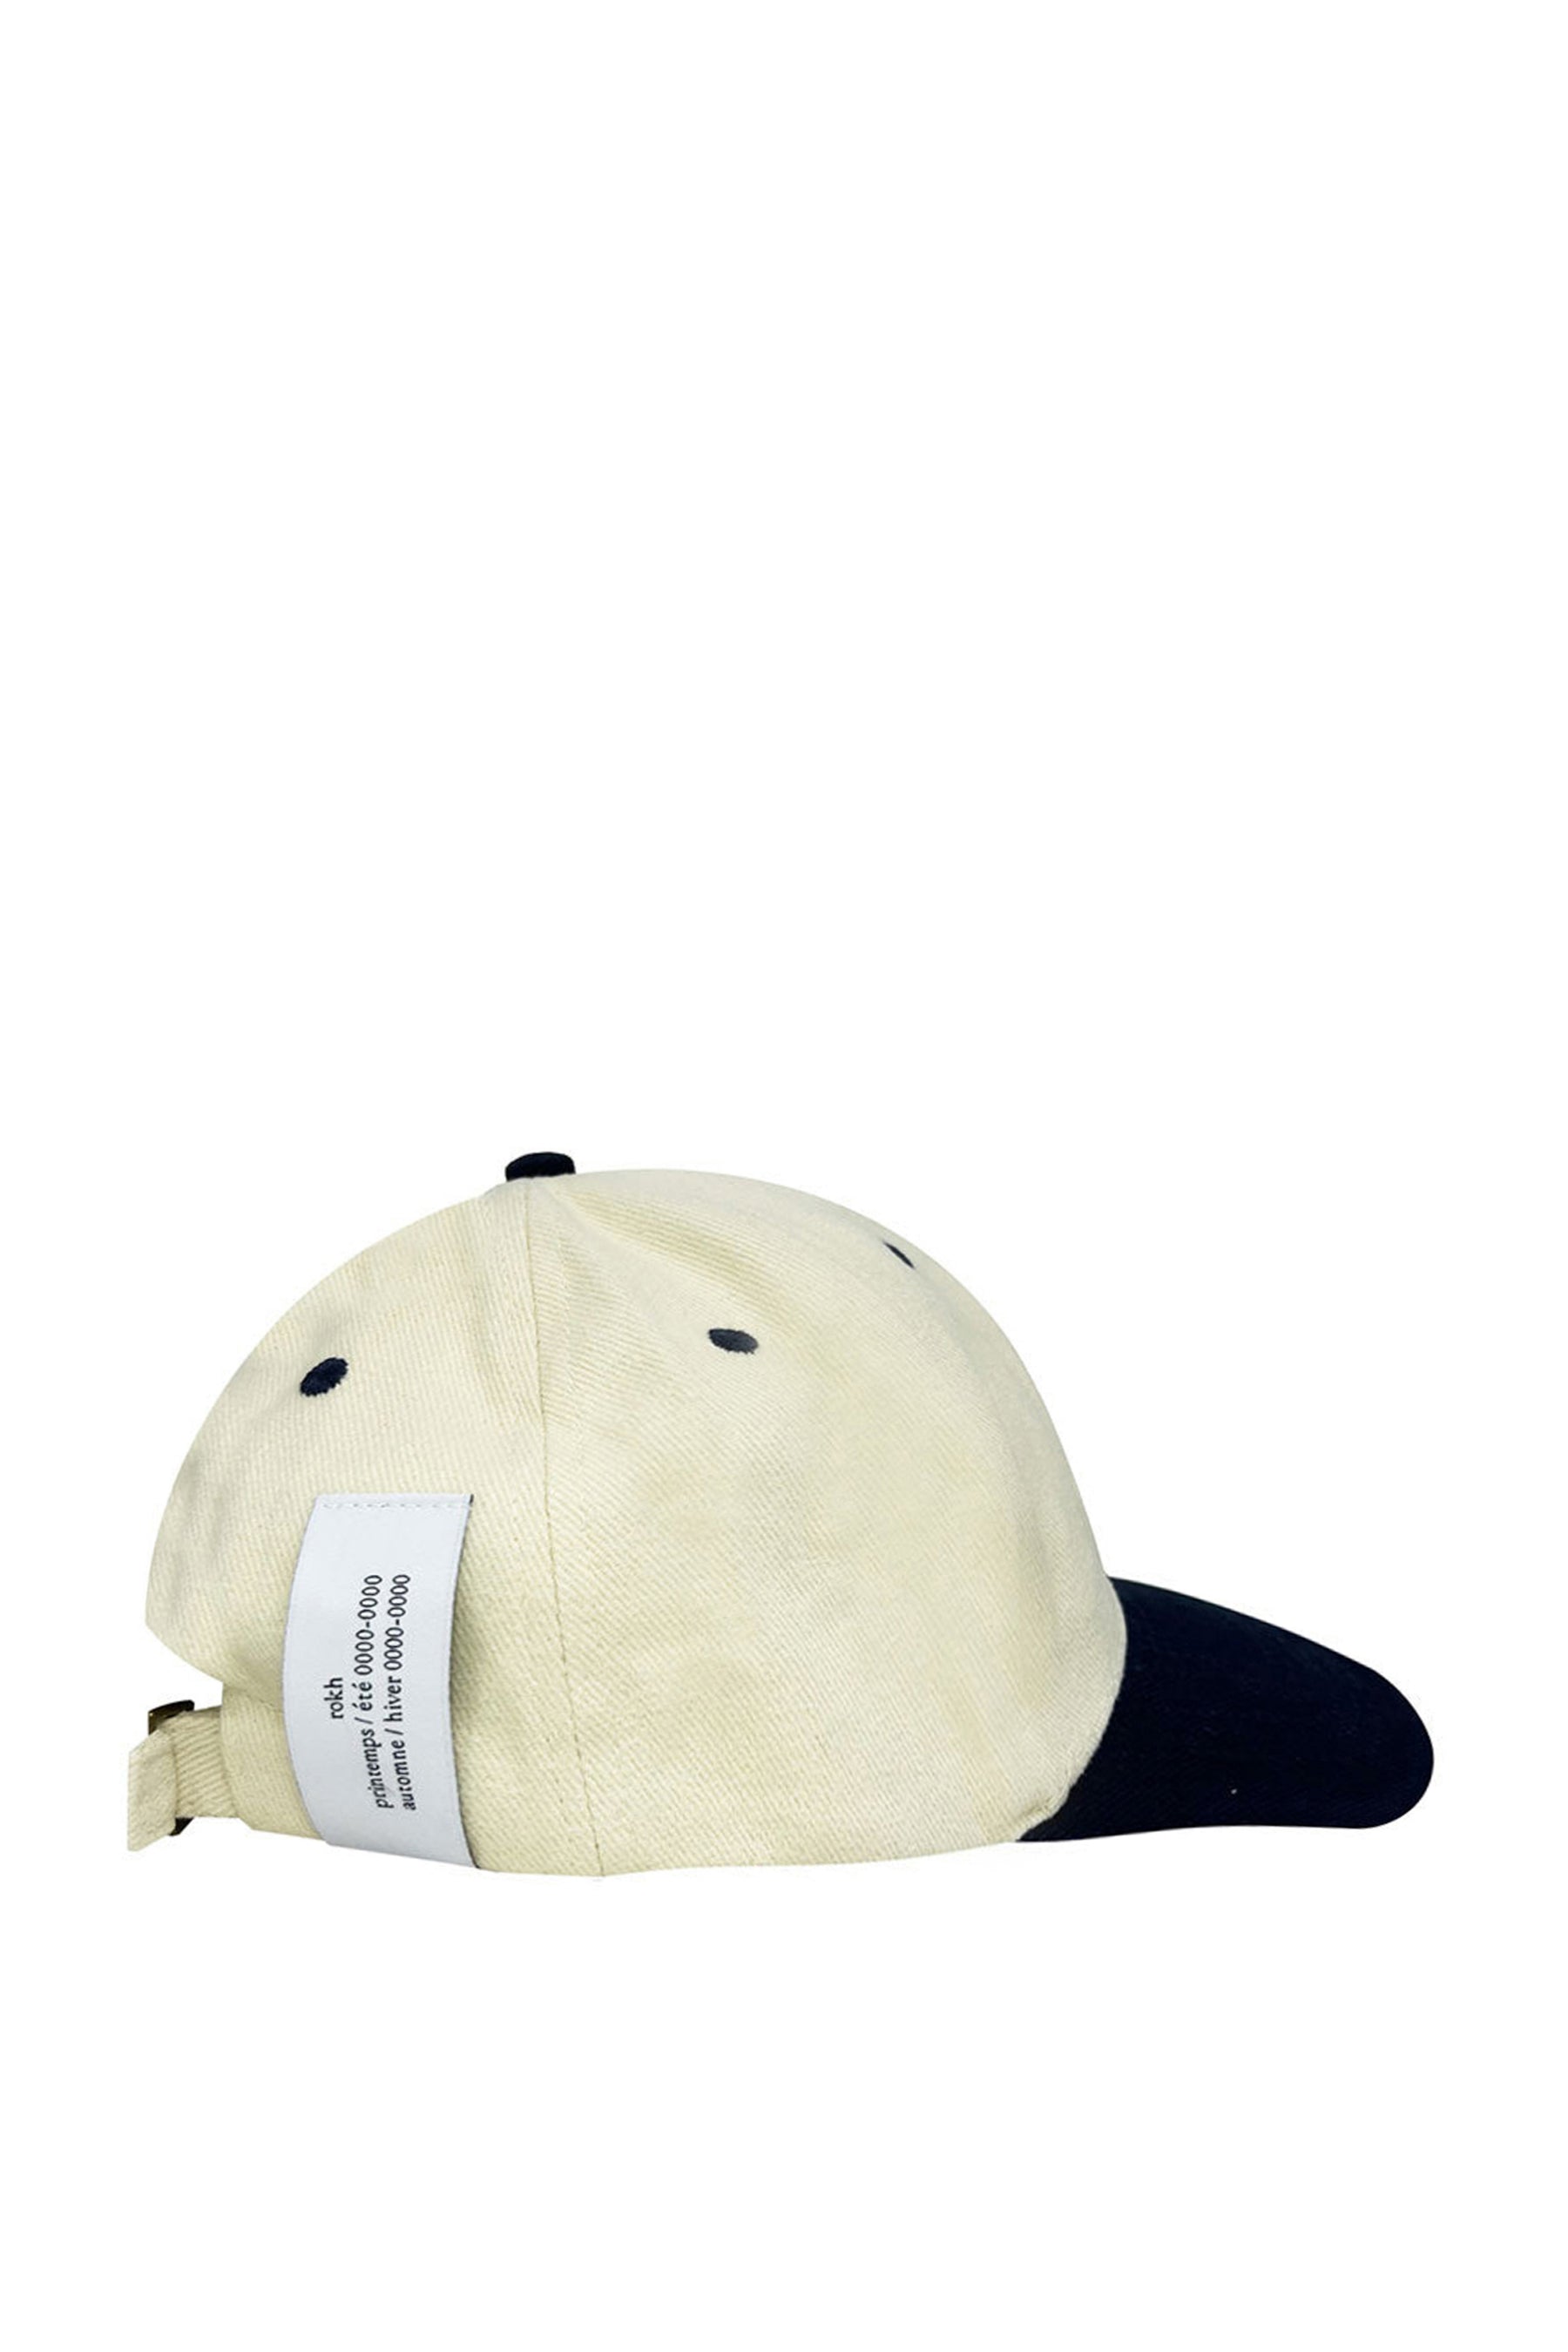 EMBROIDERED BALL CAP - IVORY NAVY / NVY